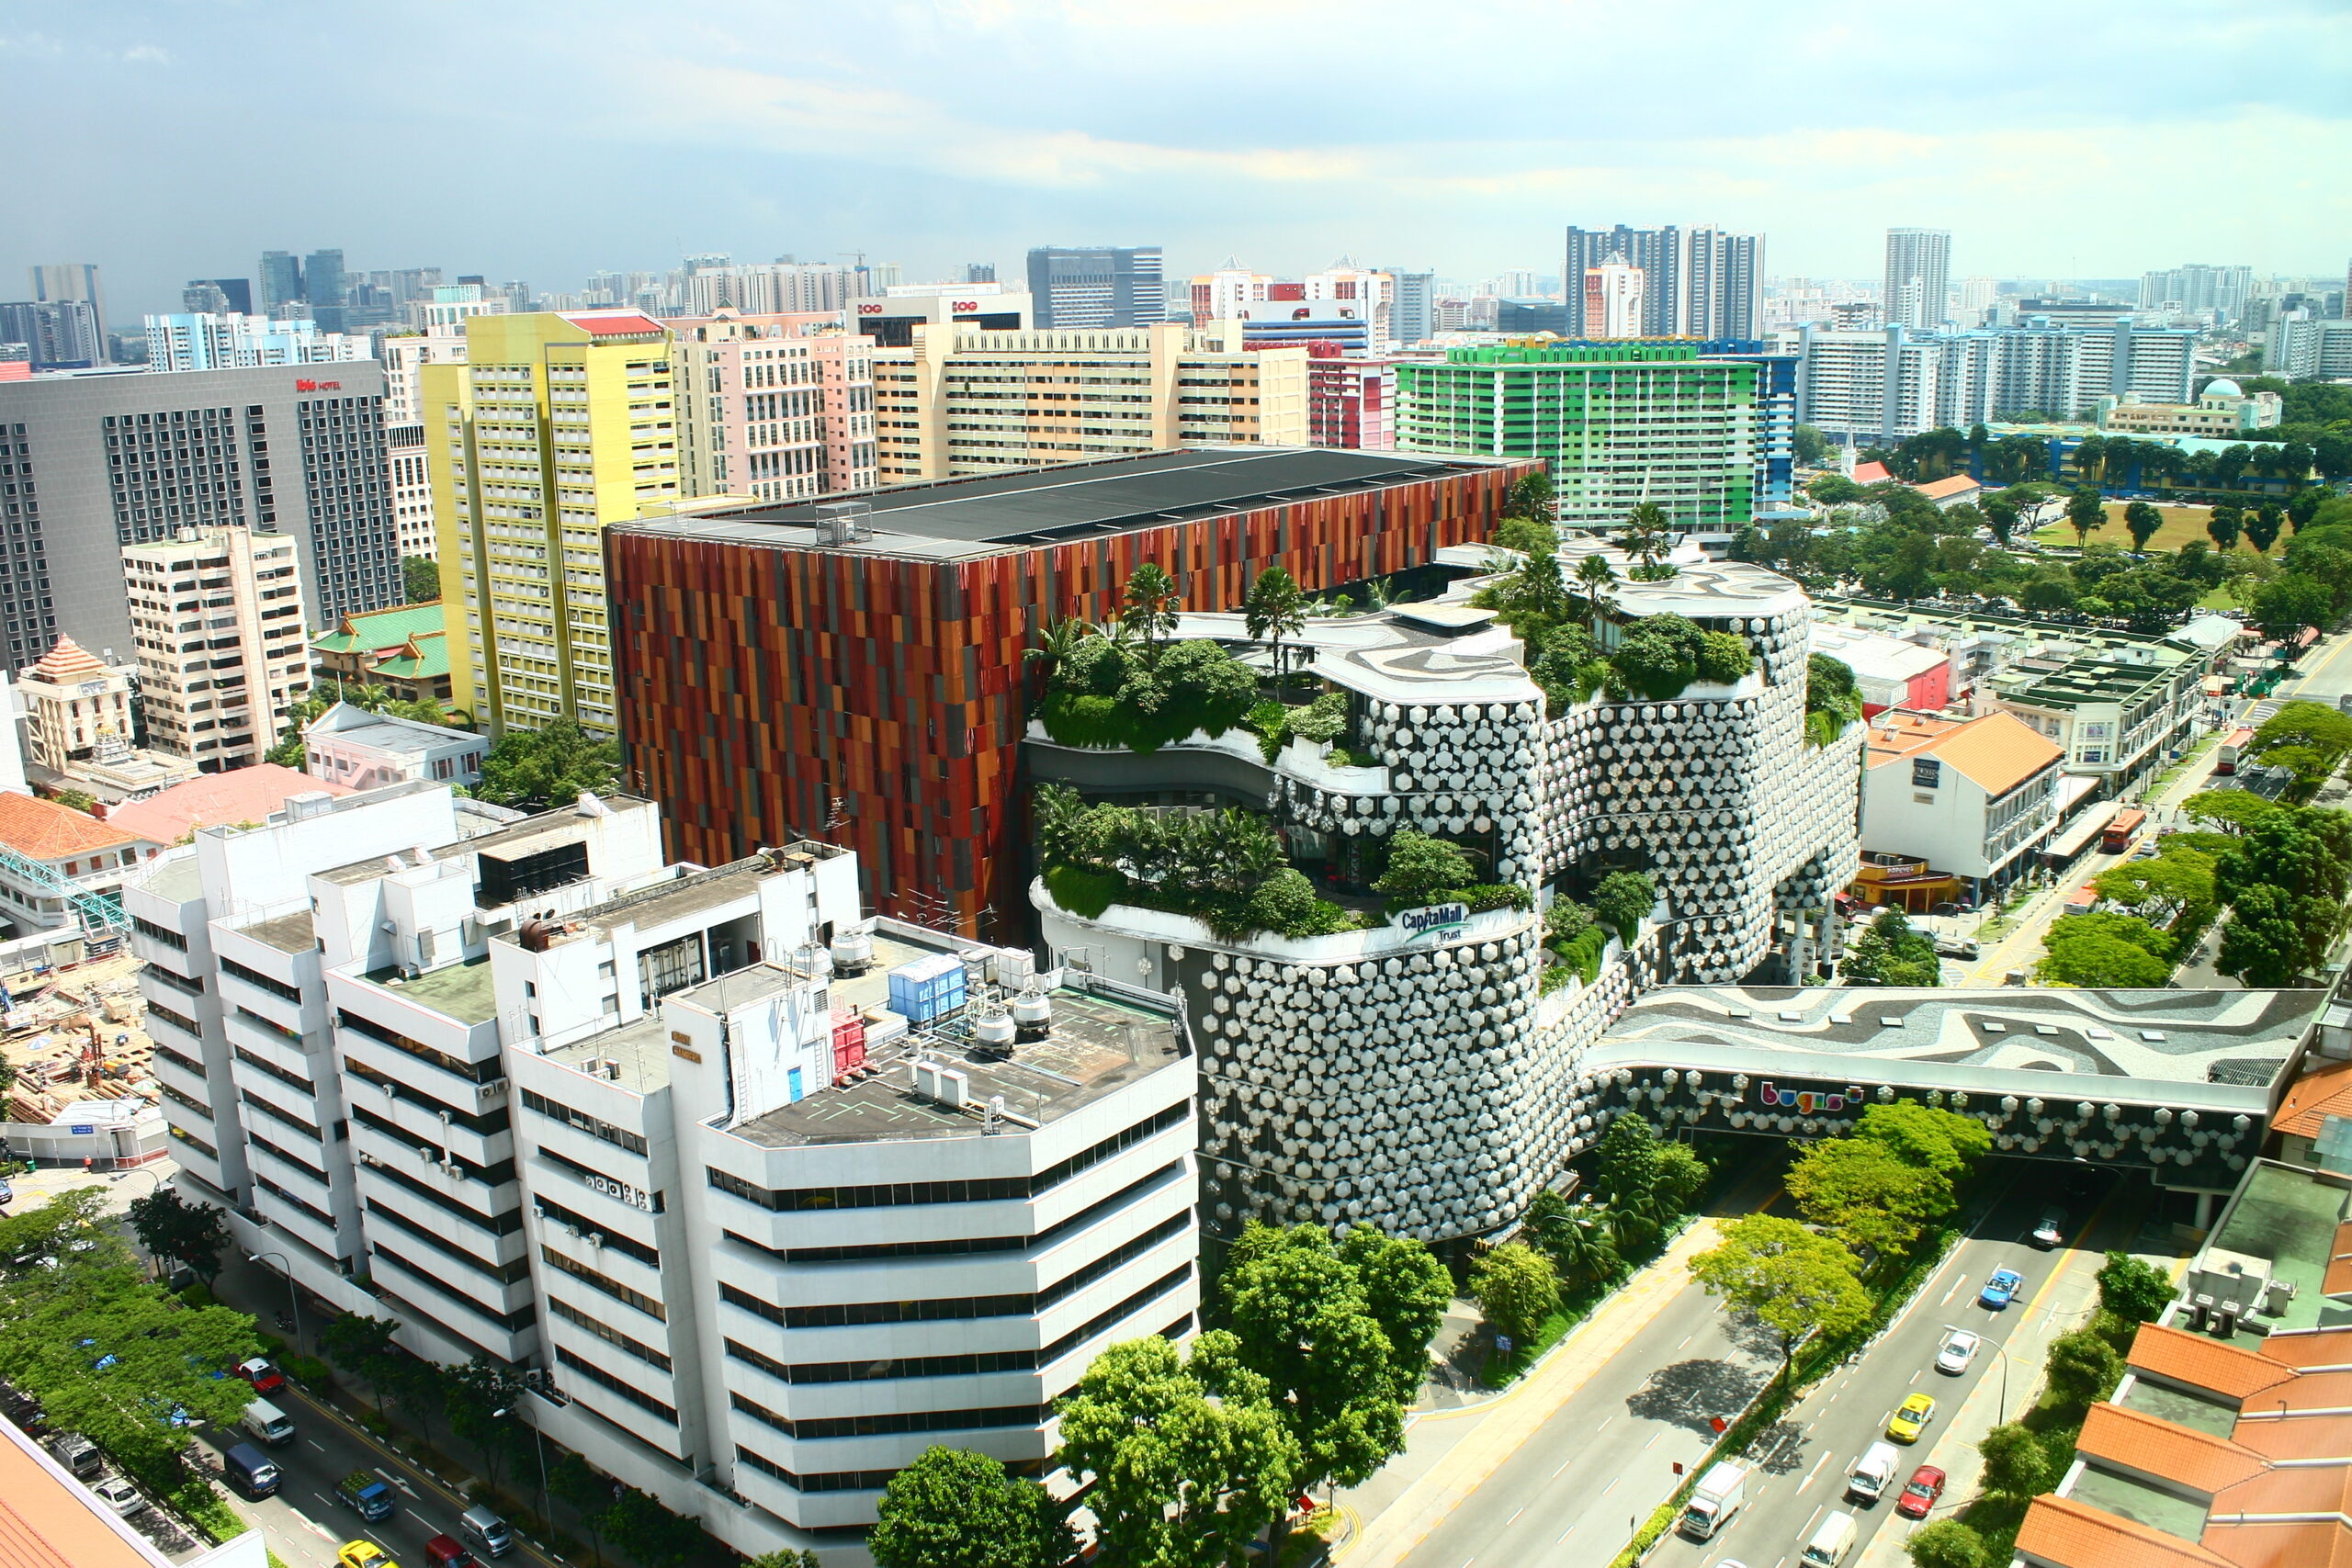 Aerial view of a shopping mall, busy roads, buildings and HDBs in Bugis